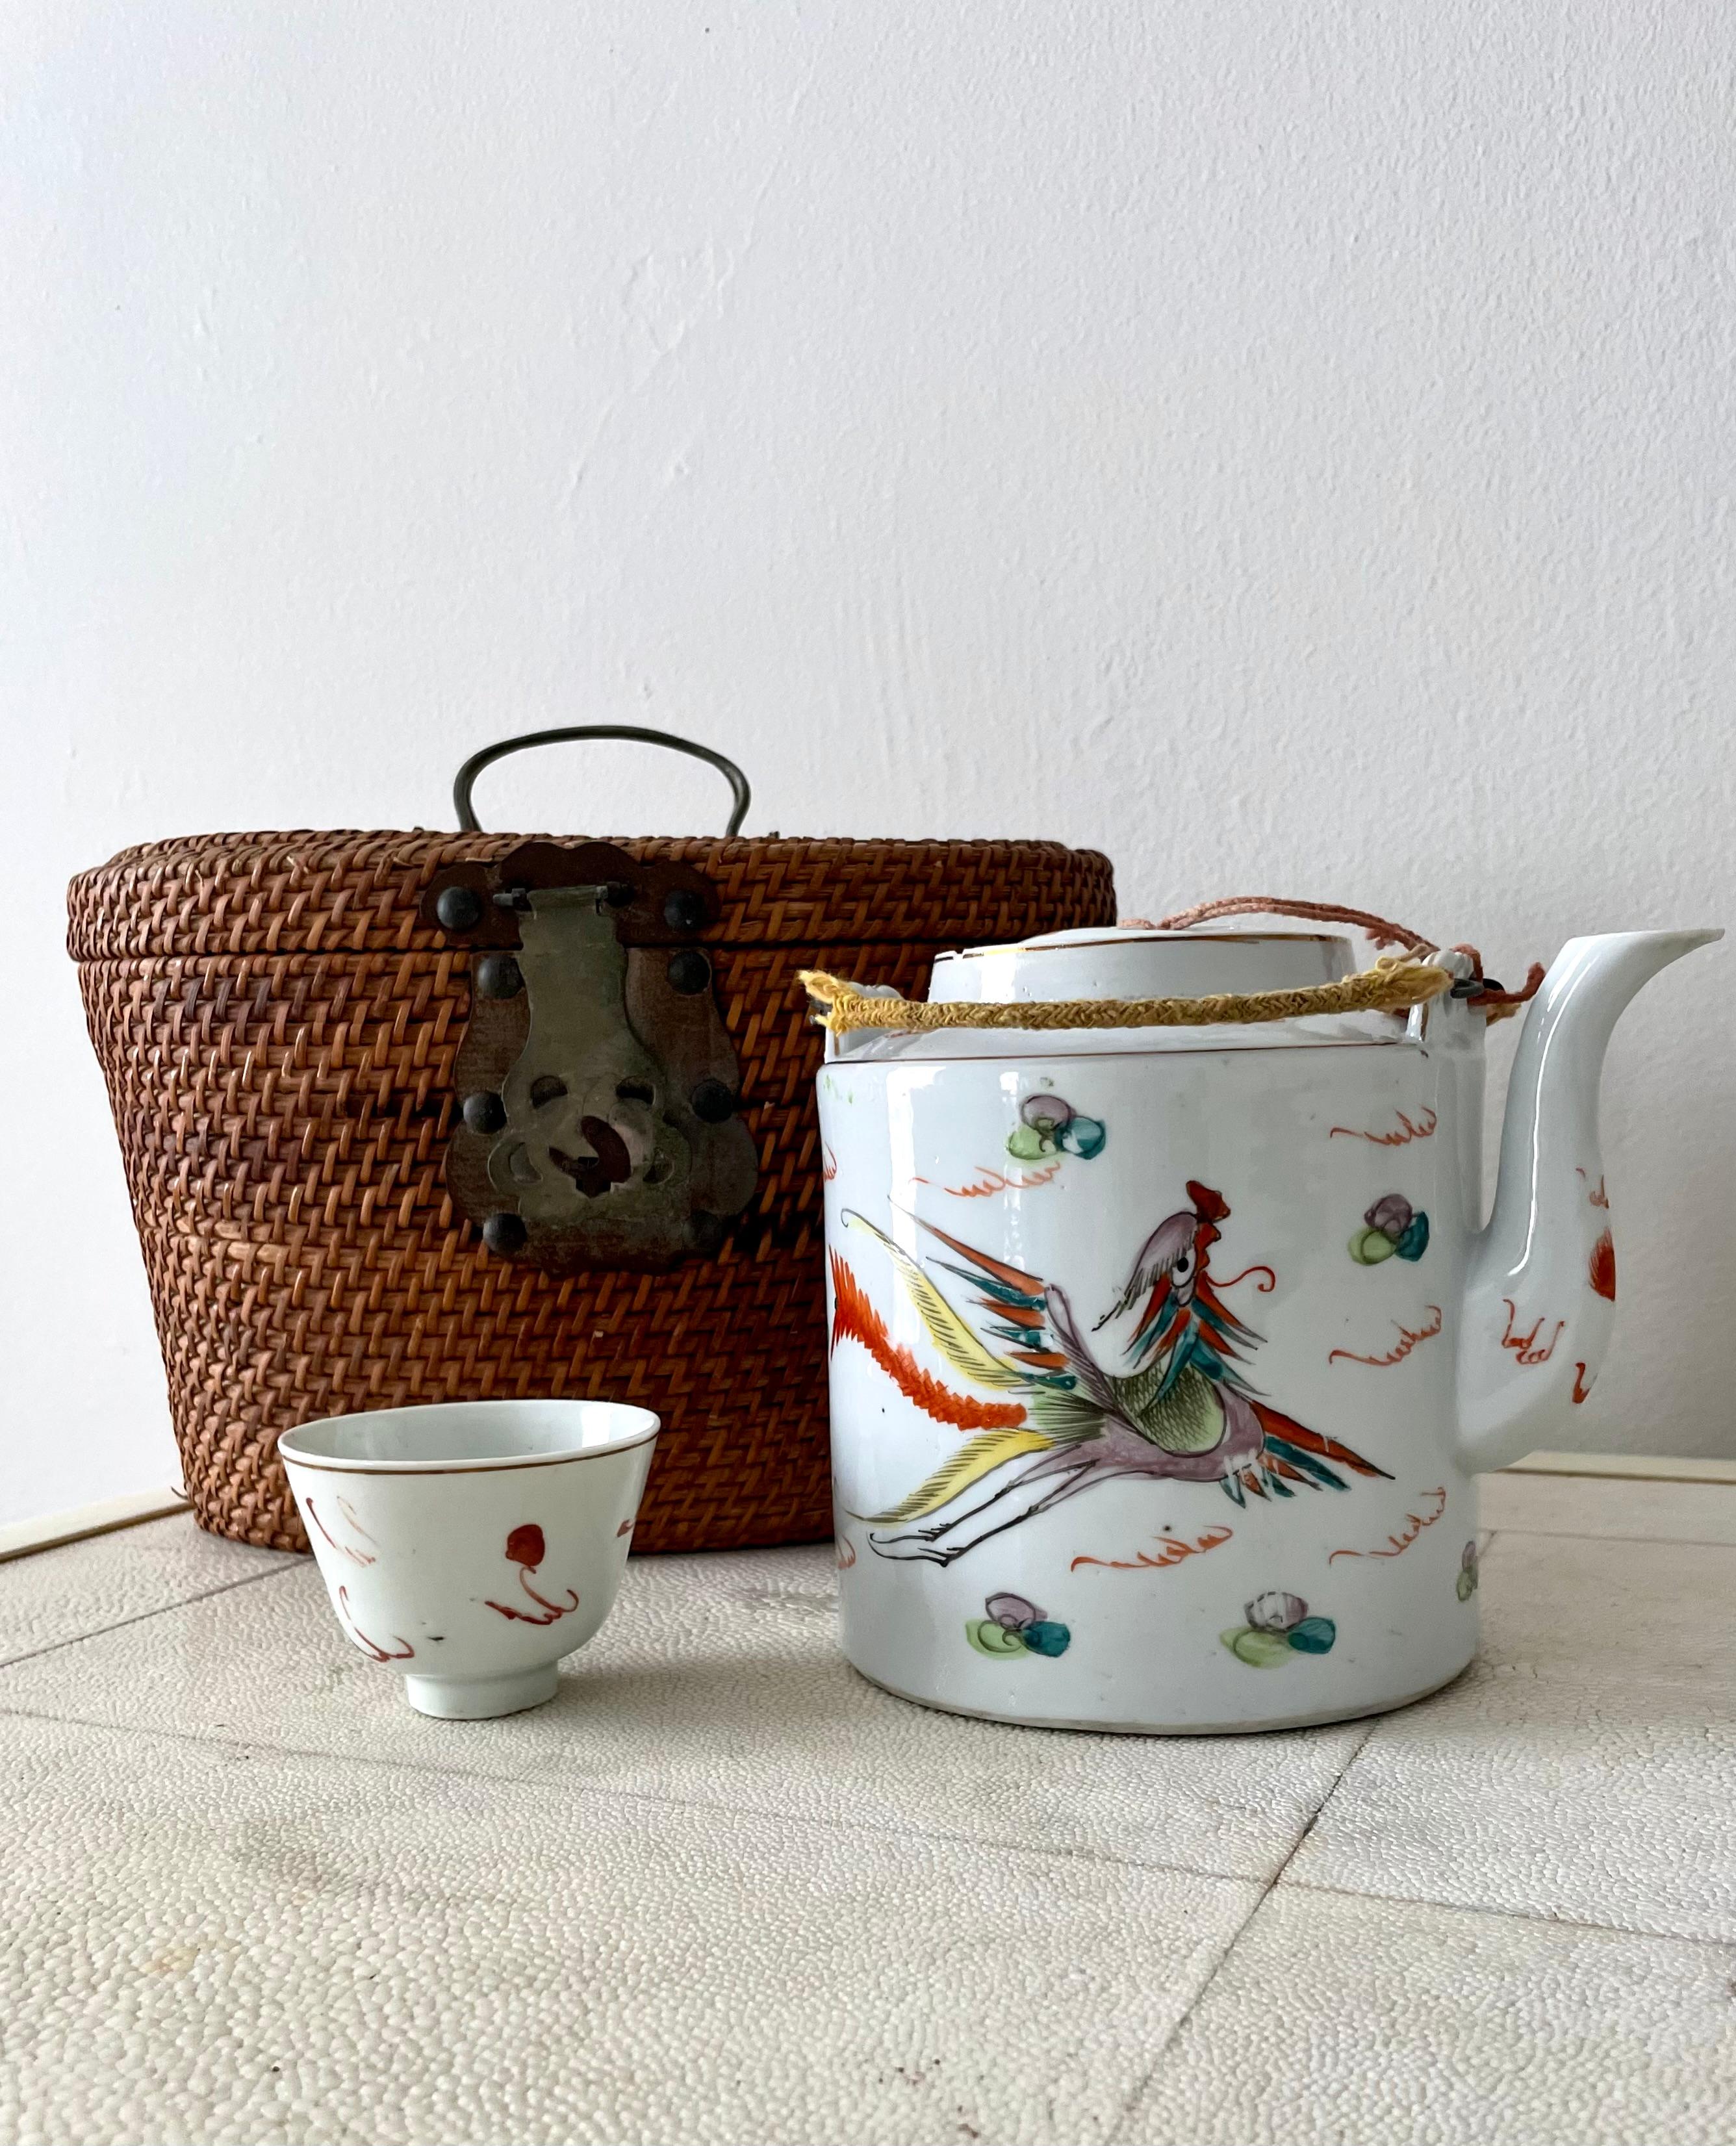 Asian Tea Set with Hand Woven Wicker Carrying Warmer Basket, Teapot and Mugs For Sale 5